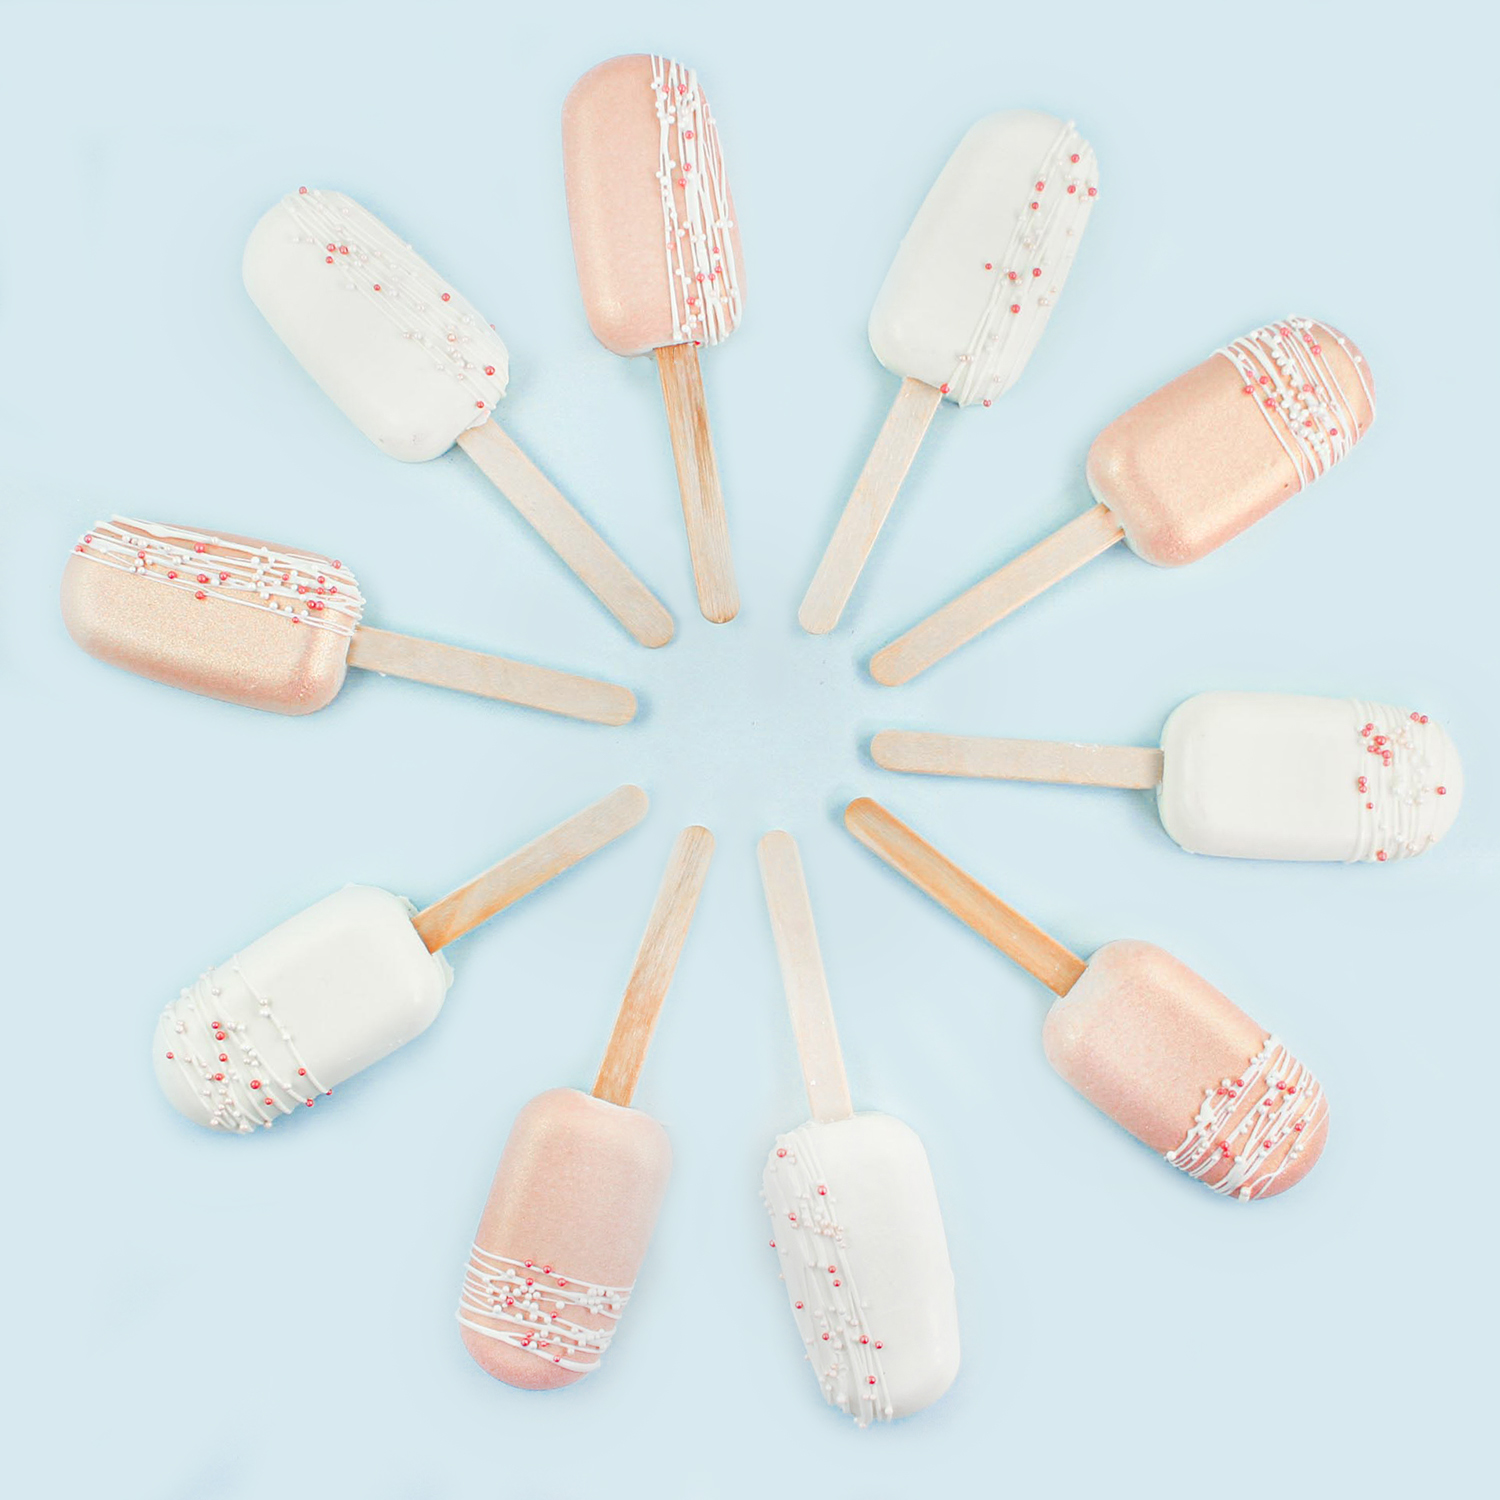 Rose gold and white cakesicles arranged into a circle